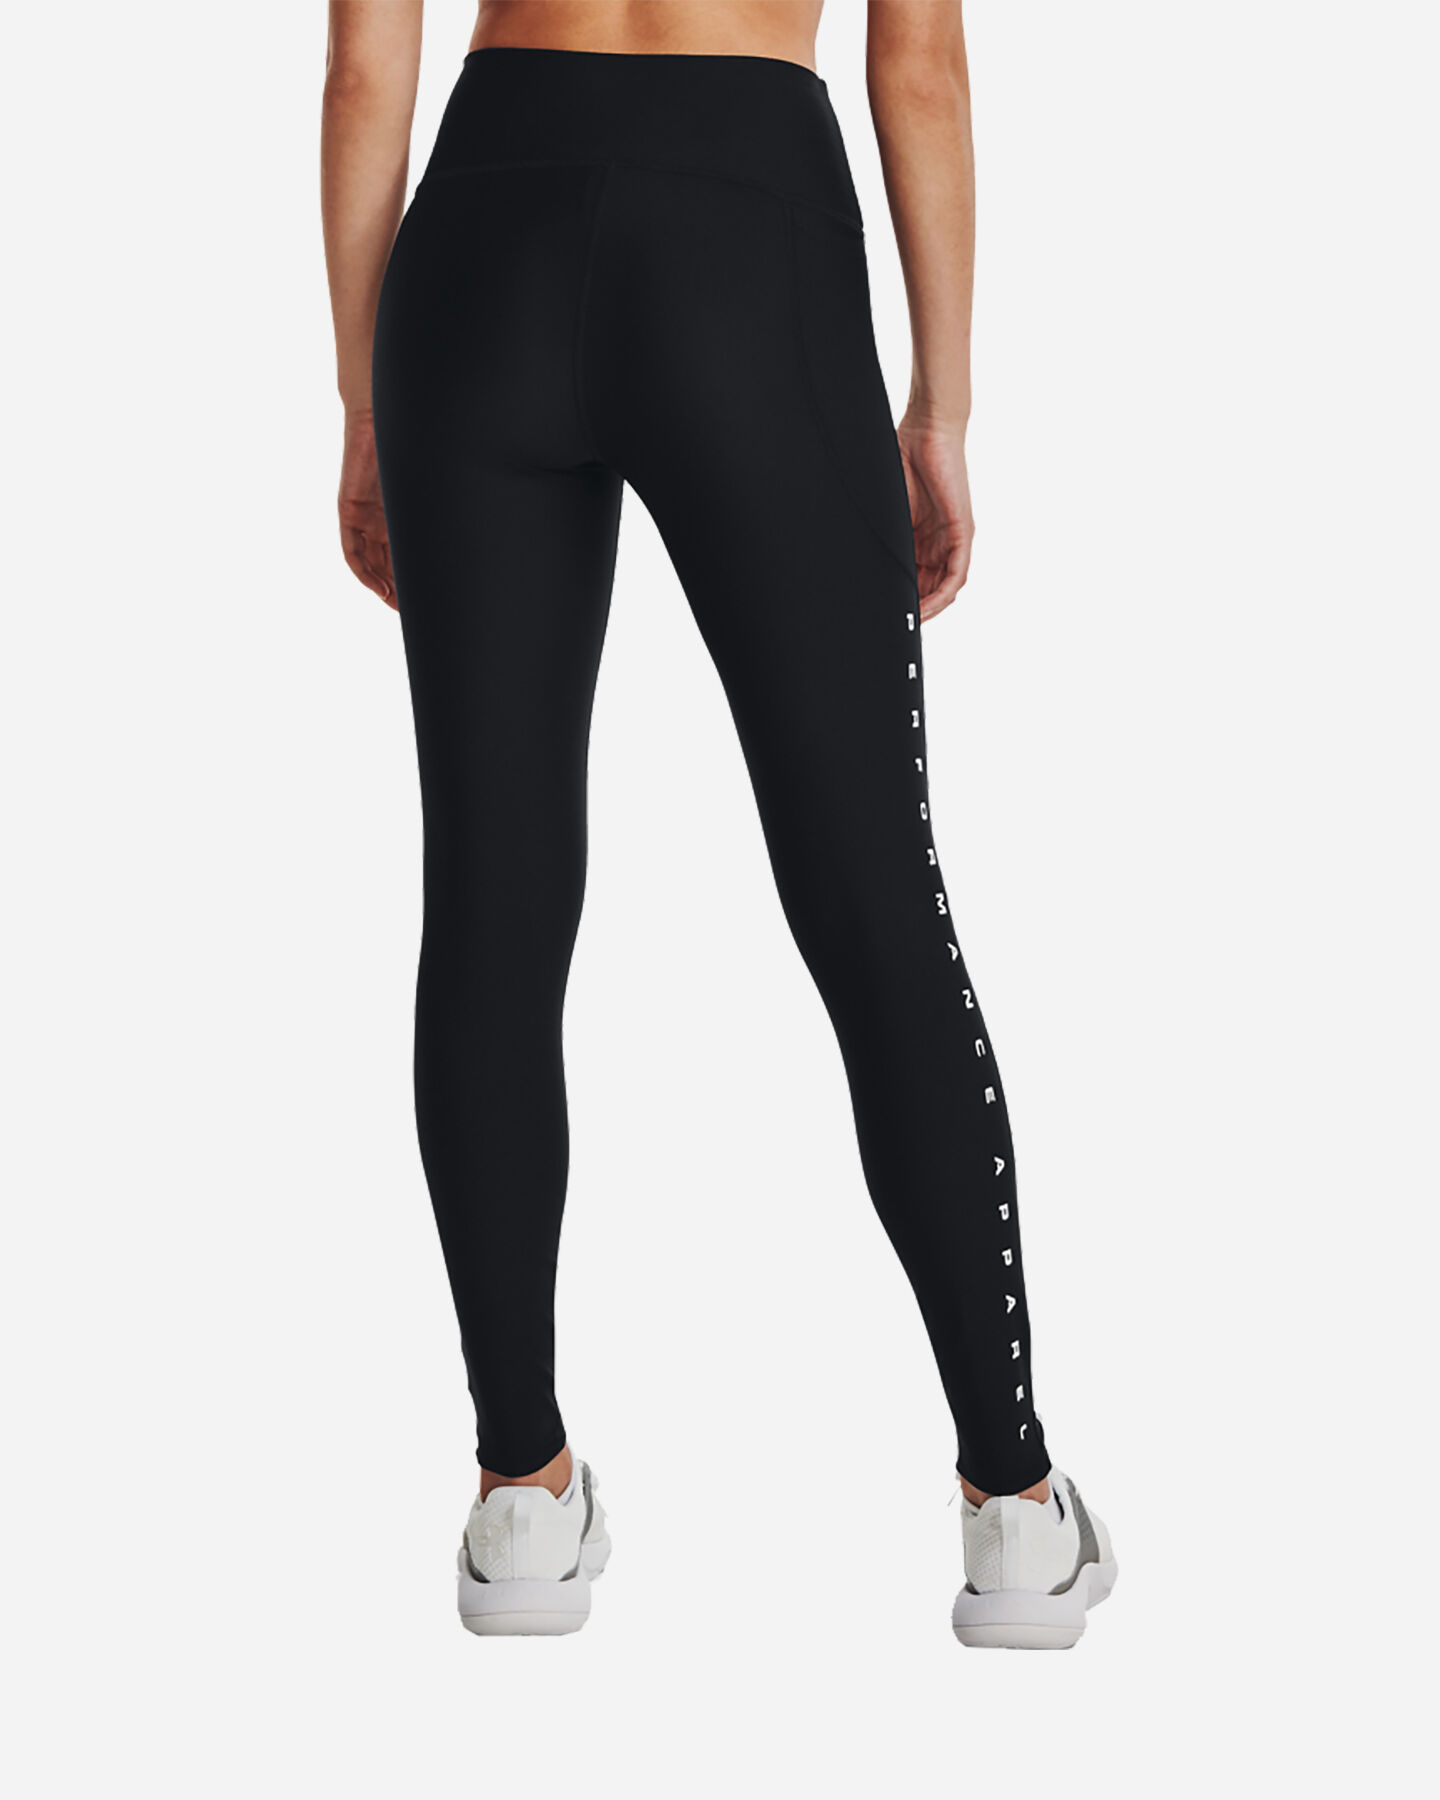  Leggings UNDER ARMOUR ST LOGO LATERAL W S5390284|0001|XS scatto 3